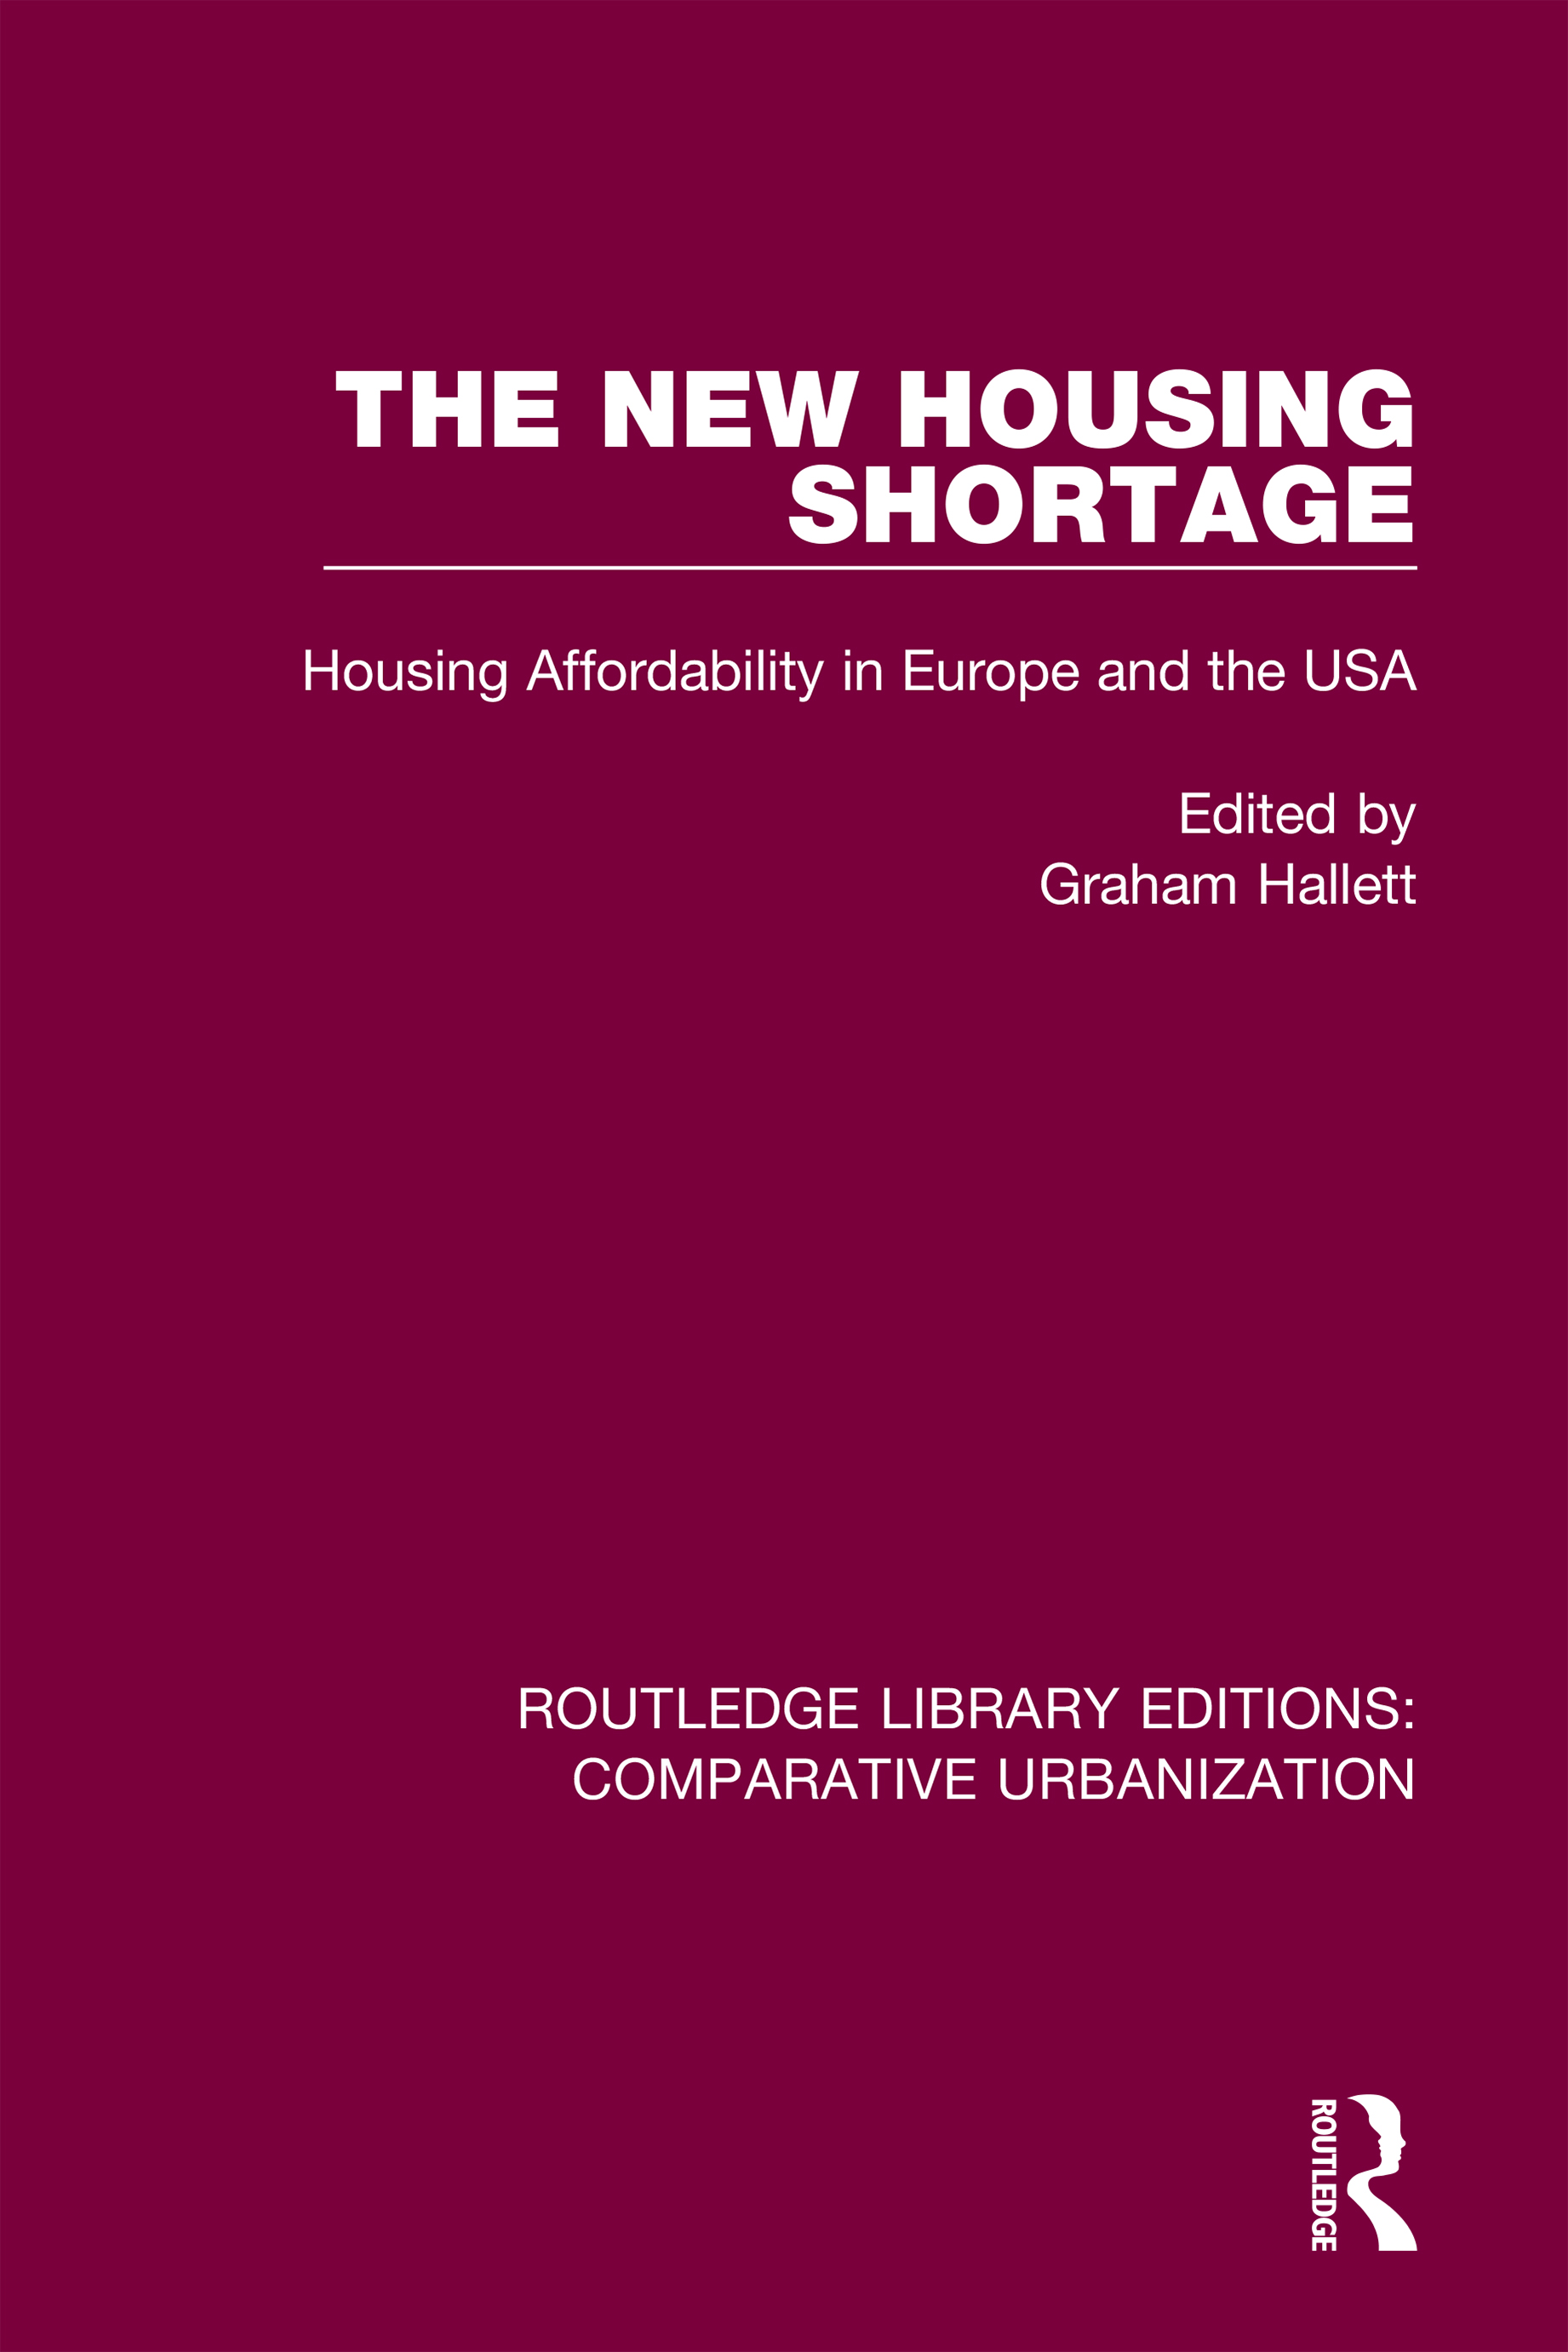 The New Housing Shortage